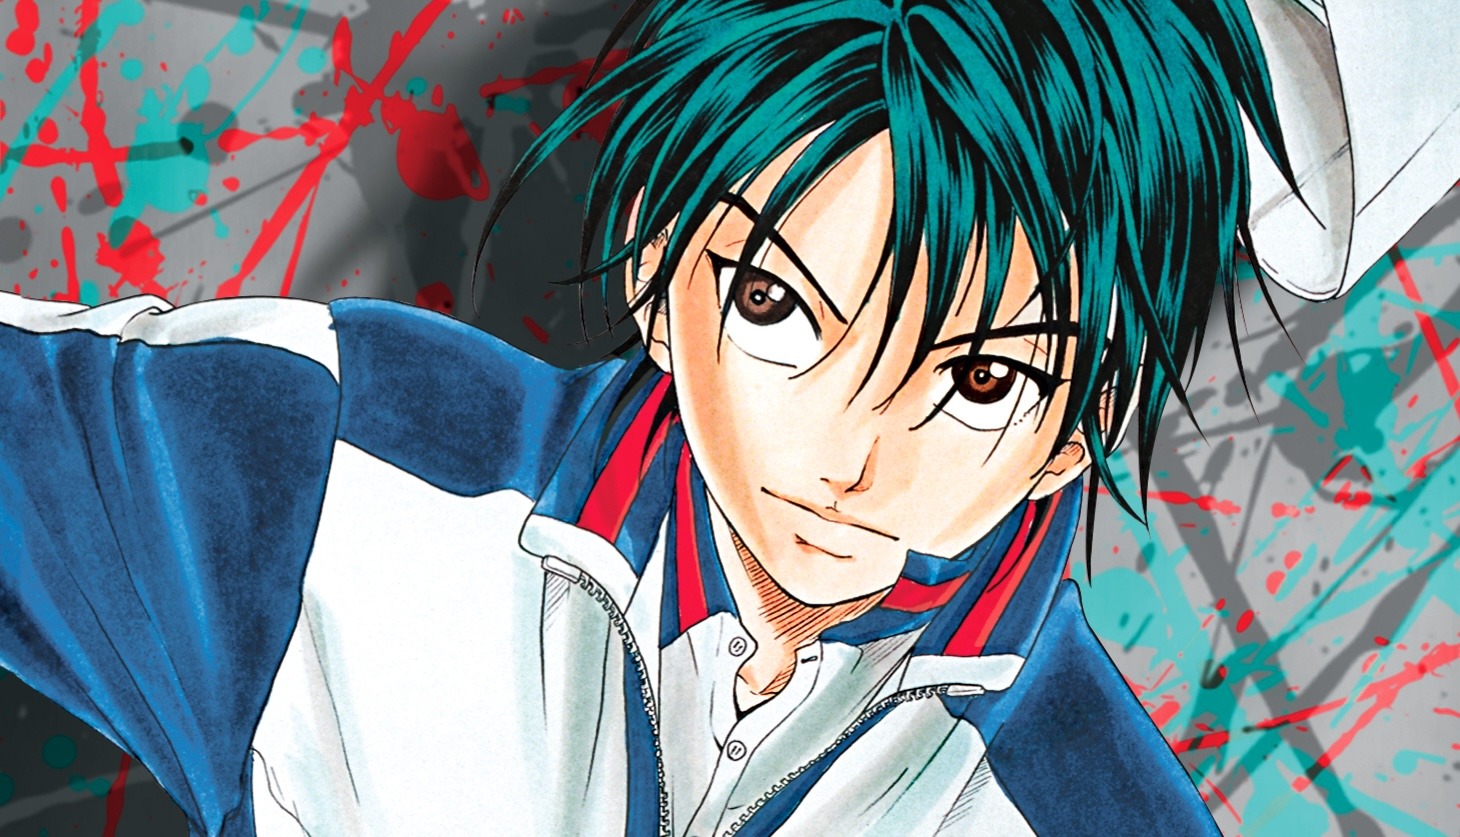 Prince of Tennis Manga Author Says He Has Difficulty Walking